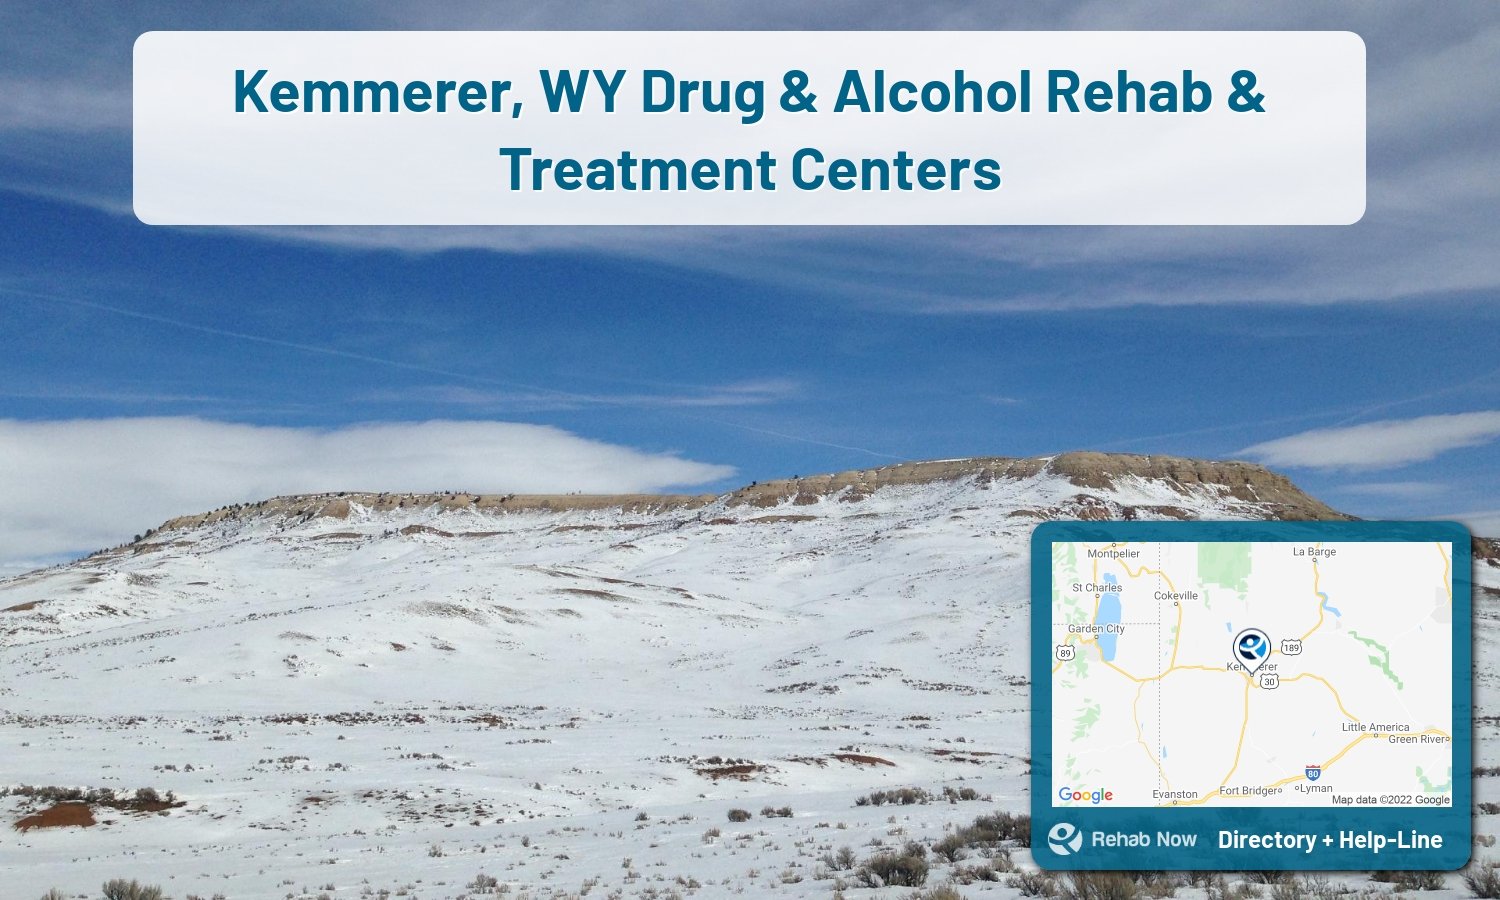 Kemmerer, WY Treatment Centers. Find drug rehab in Kemmerer, Wyoming, or detox and treatment programs. Get the right help now!